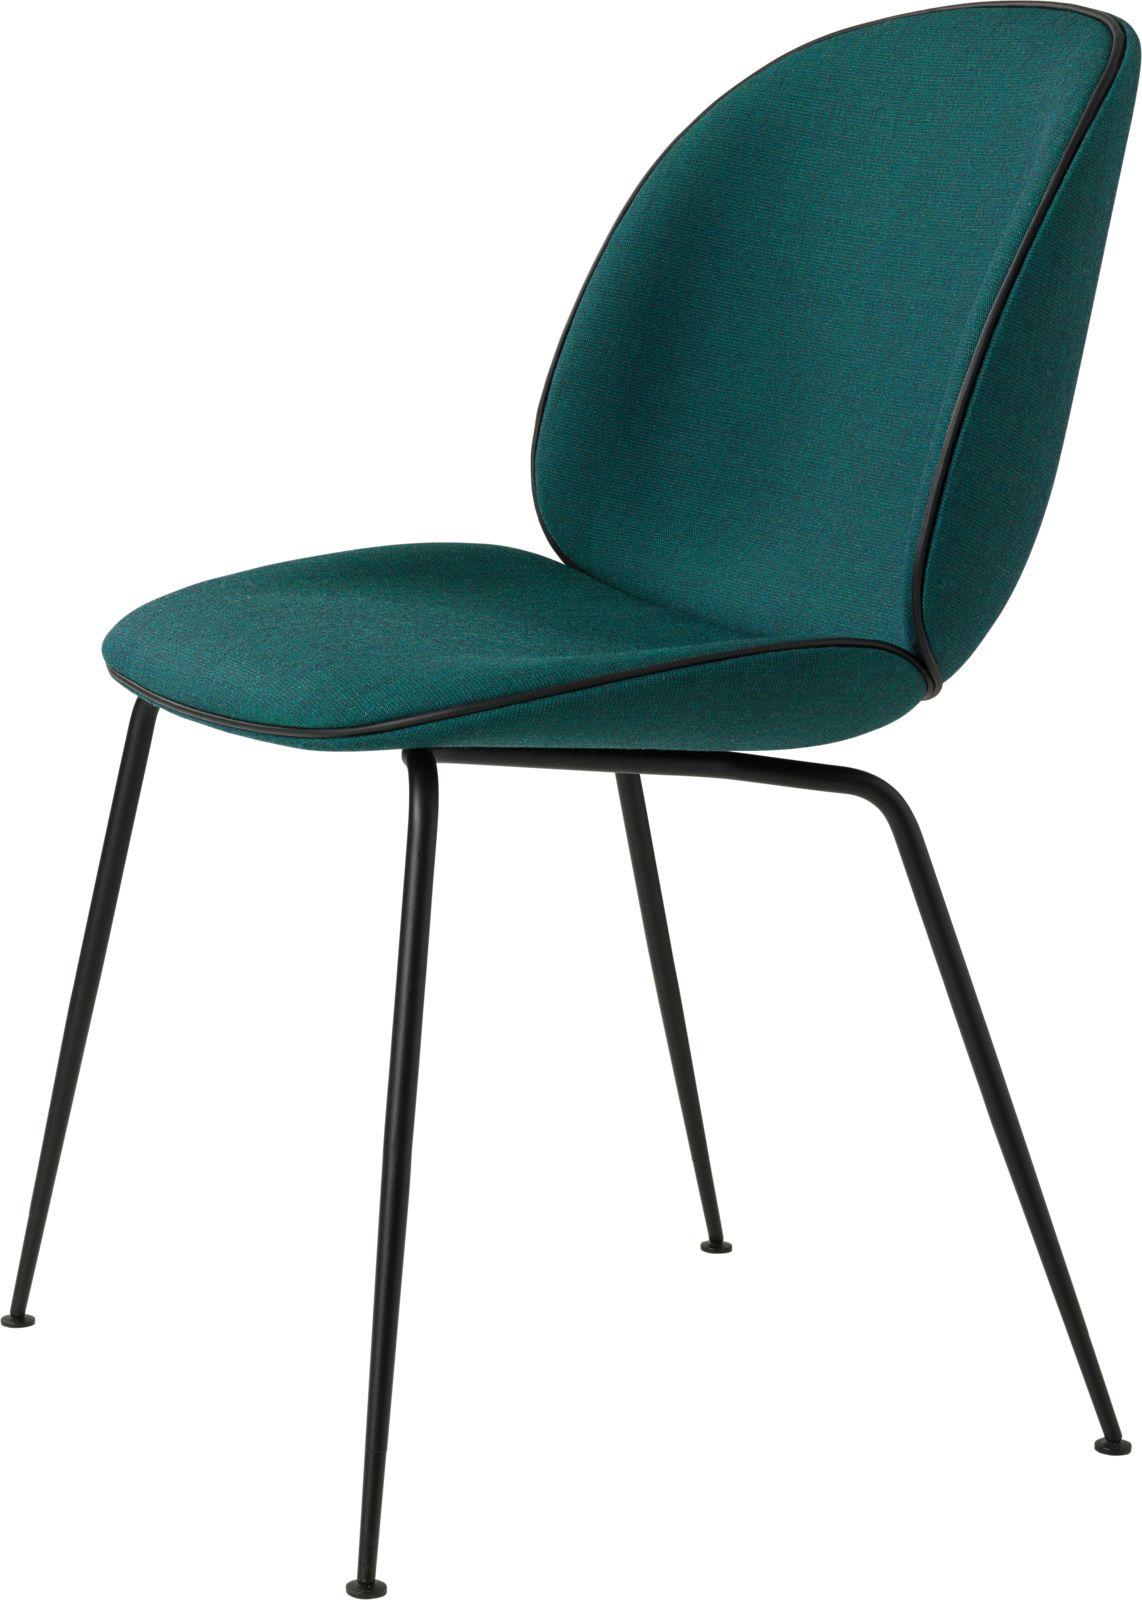 GamFratesi 'Beetle' Dining Chair in Blue with Conic Base 5